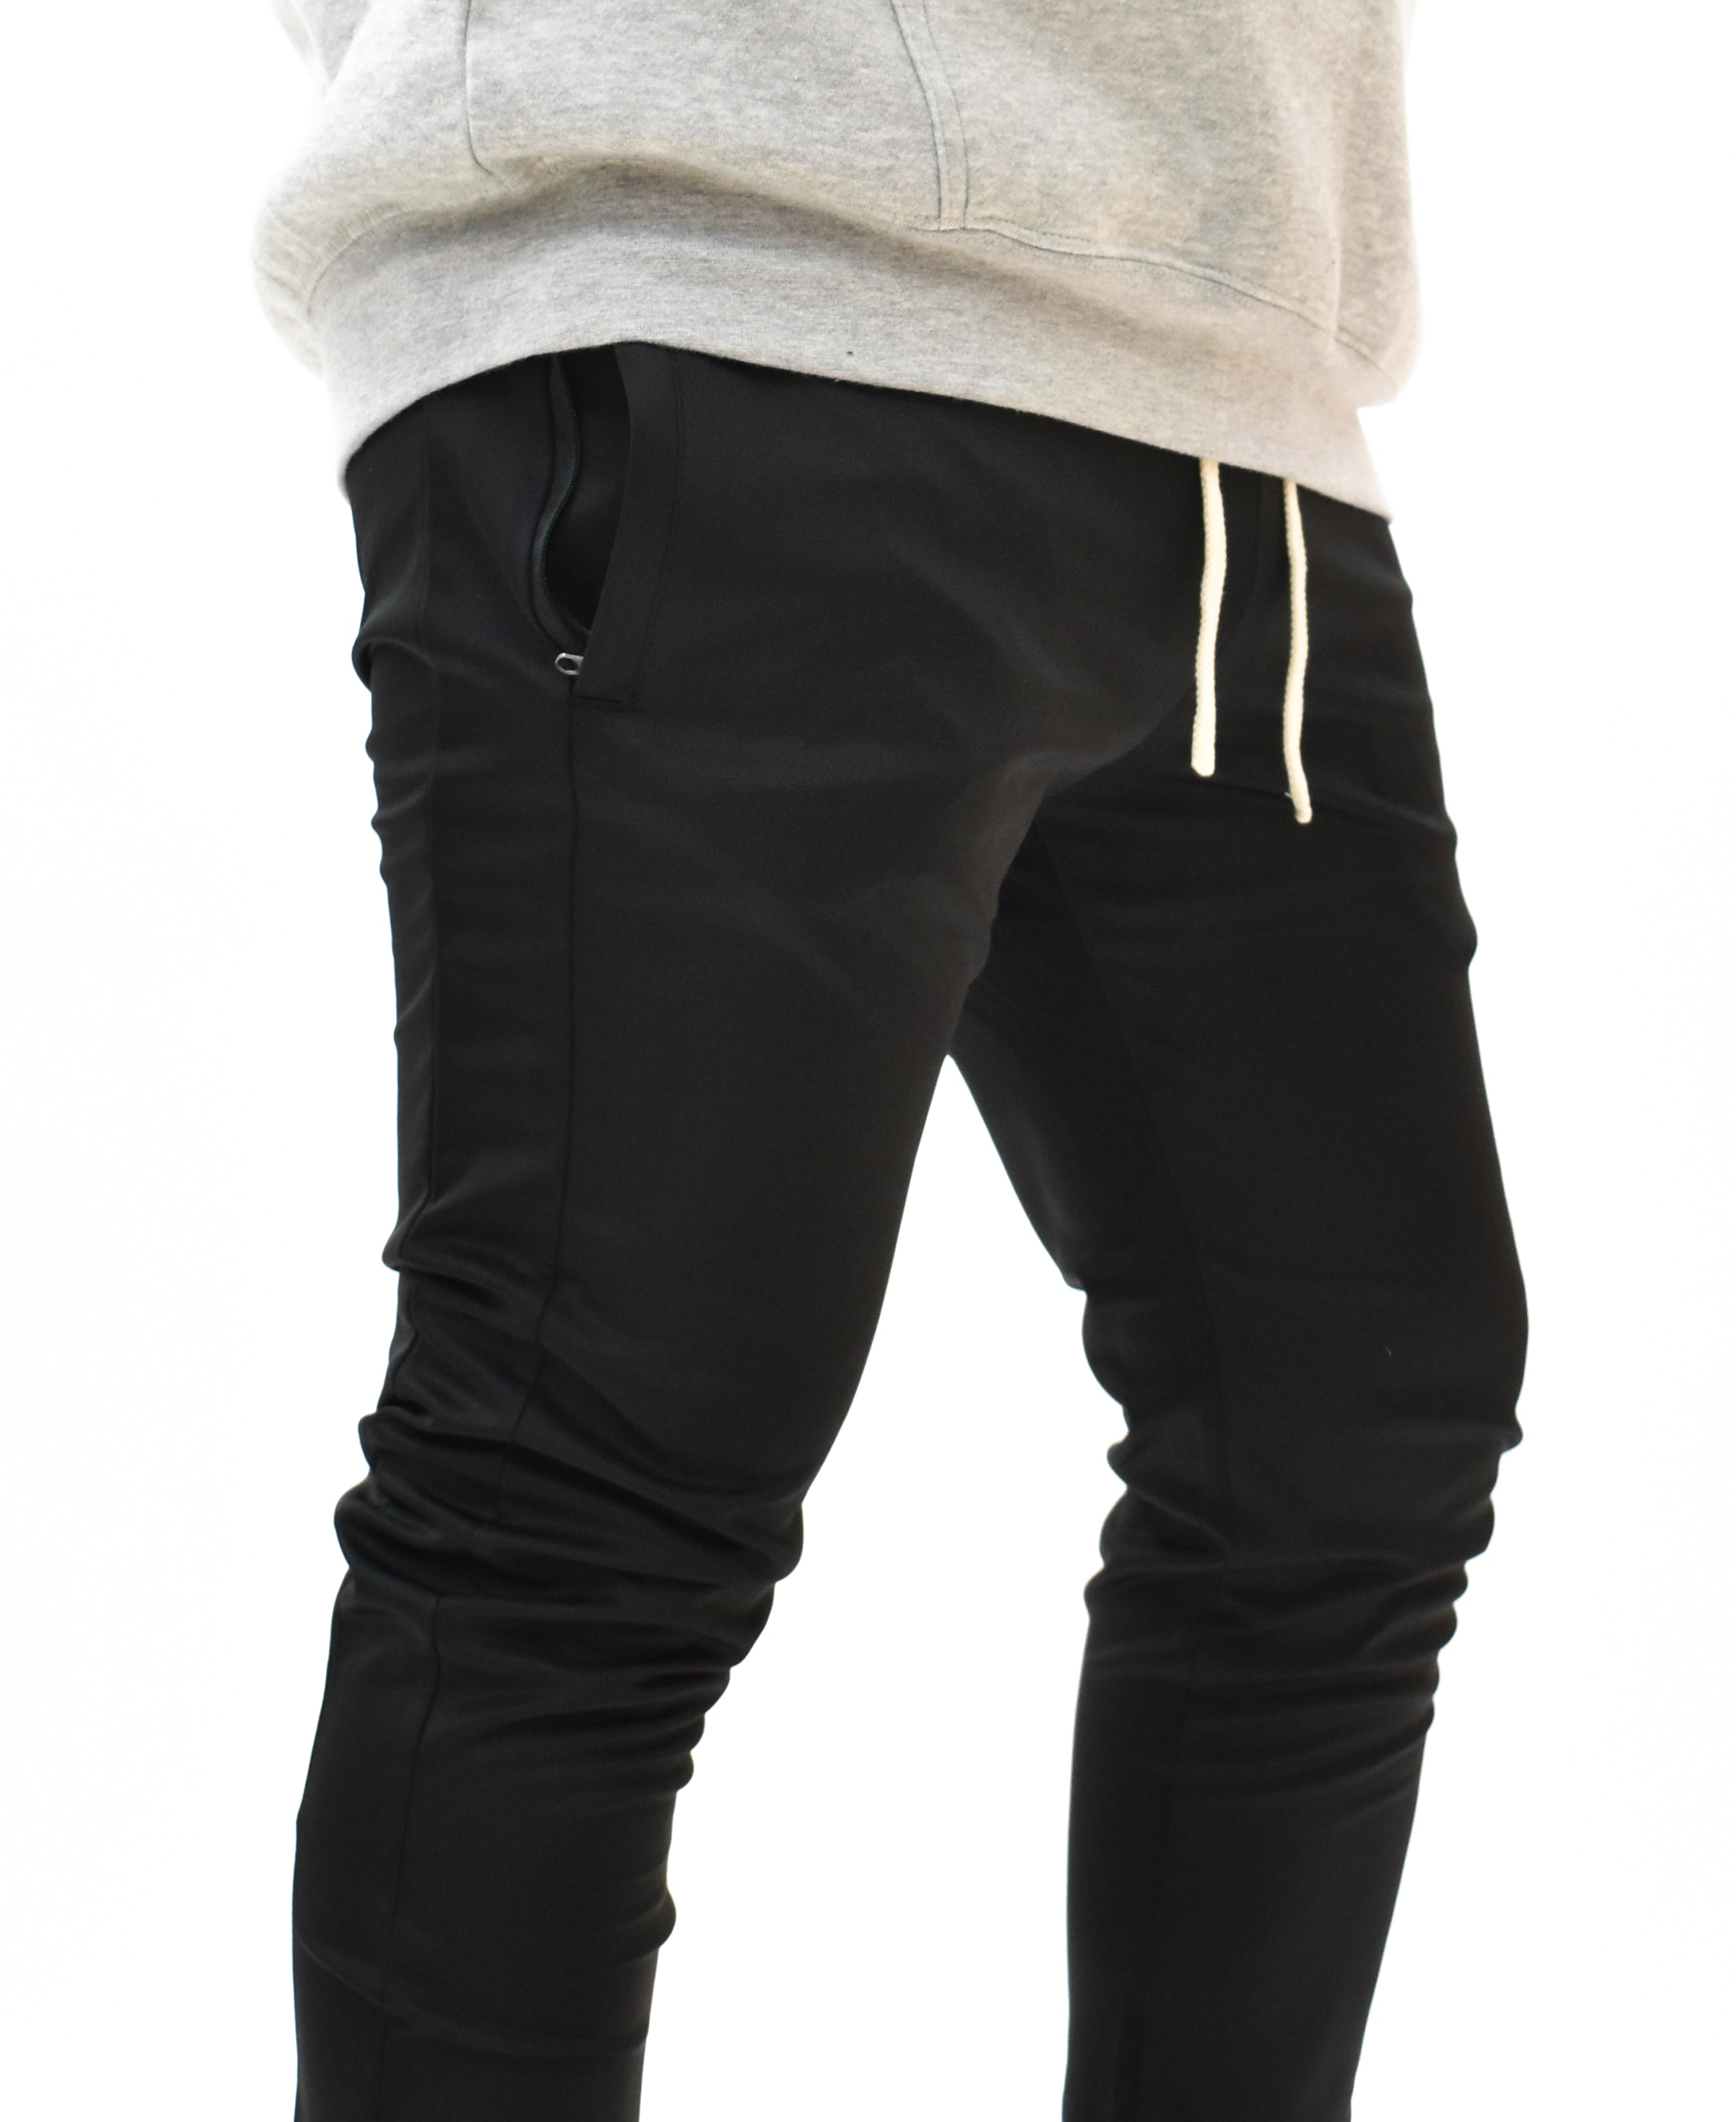 N89205 Stacked Trackpants